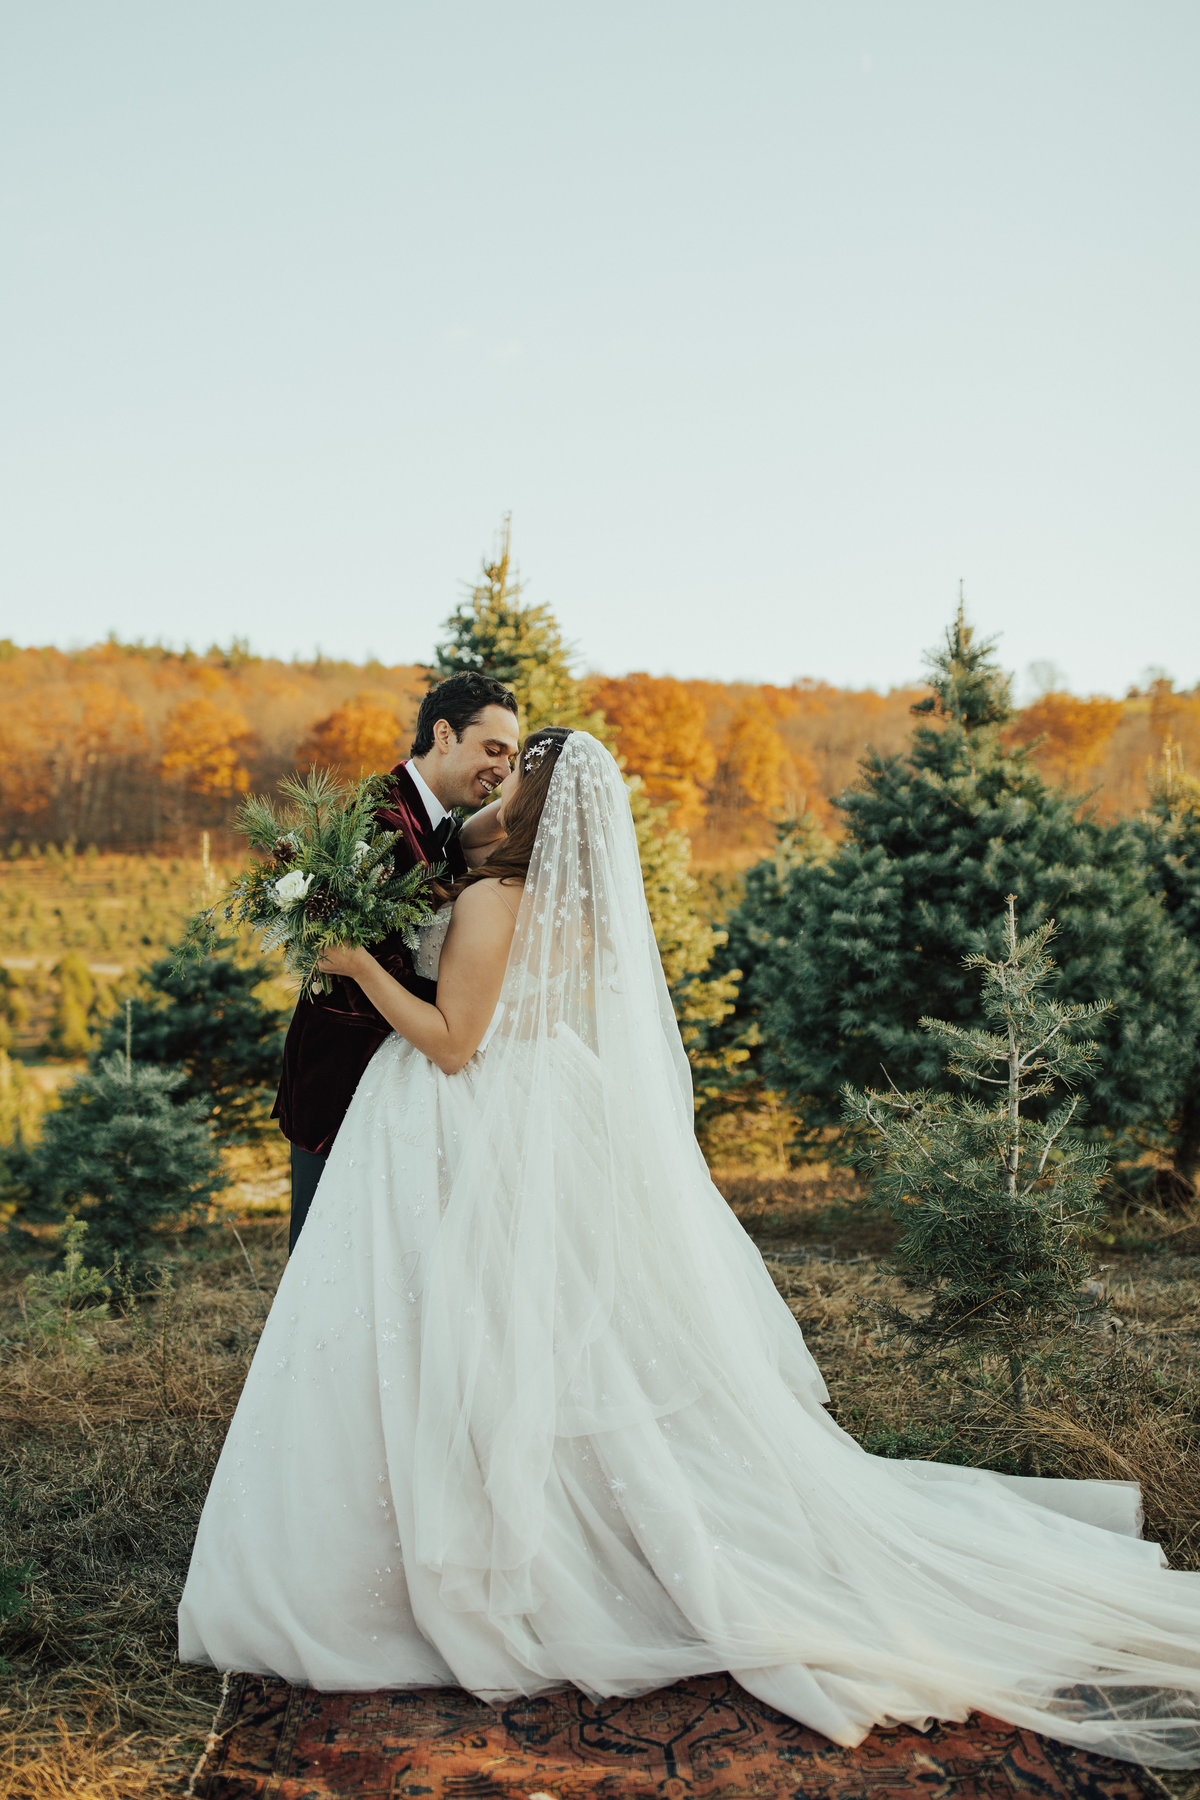 Christy-l-Johnston-Photography-Monica-Relyea-Events-Noelle-Downing-Instagram-Noelle_s-Favorite-Day-Wedding-Battenfelds-Christmas-tree-farm-Red-Hook-New-York-Hudson-Valley-upstate-november-2019-AP1A8324